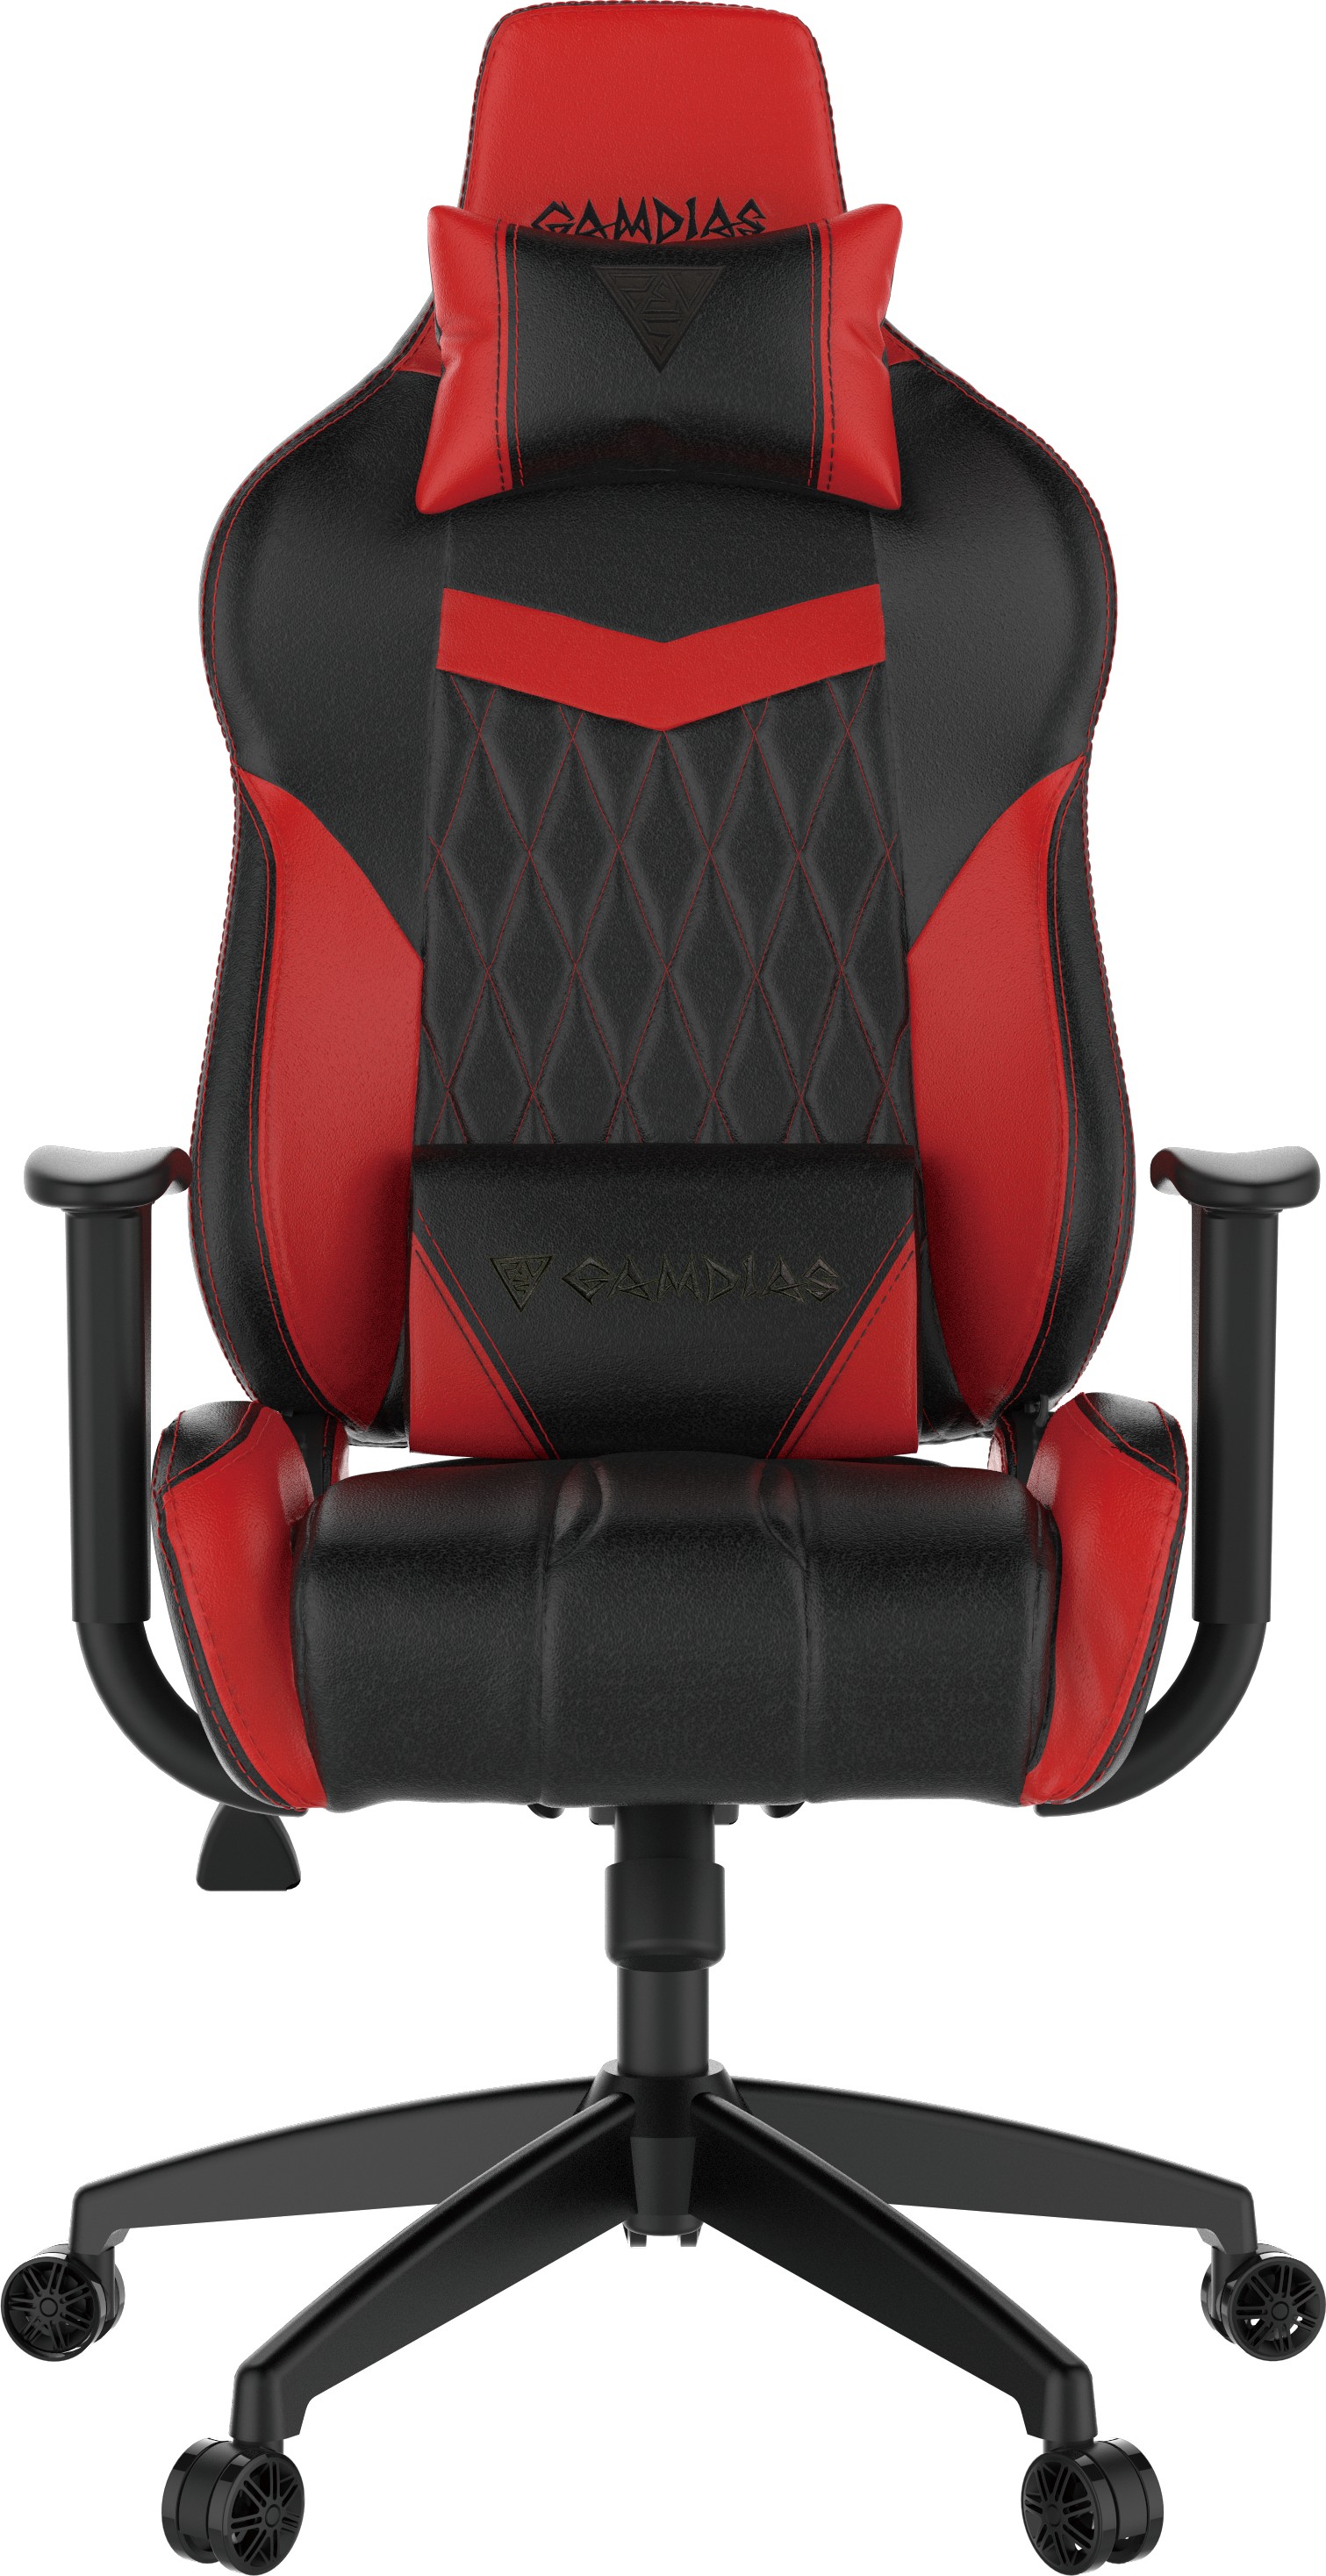 Gameing Chair Red : AK Racing Inferno Gaming Chair - Red & Black | OcUK